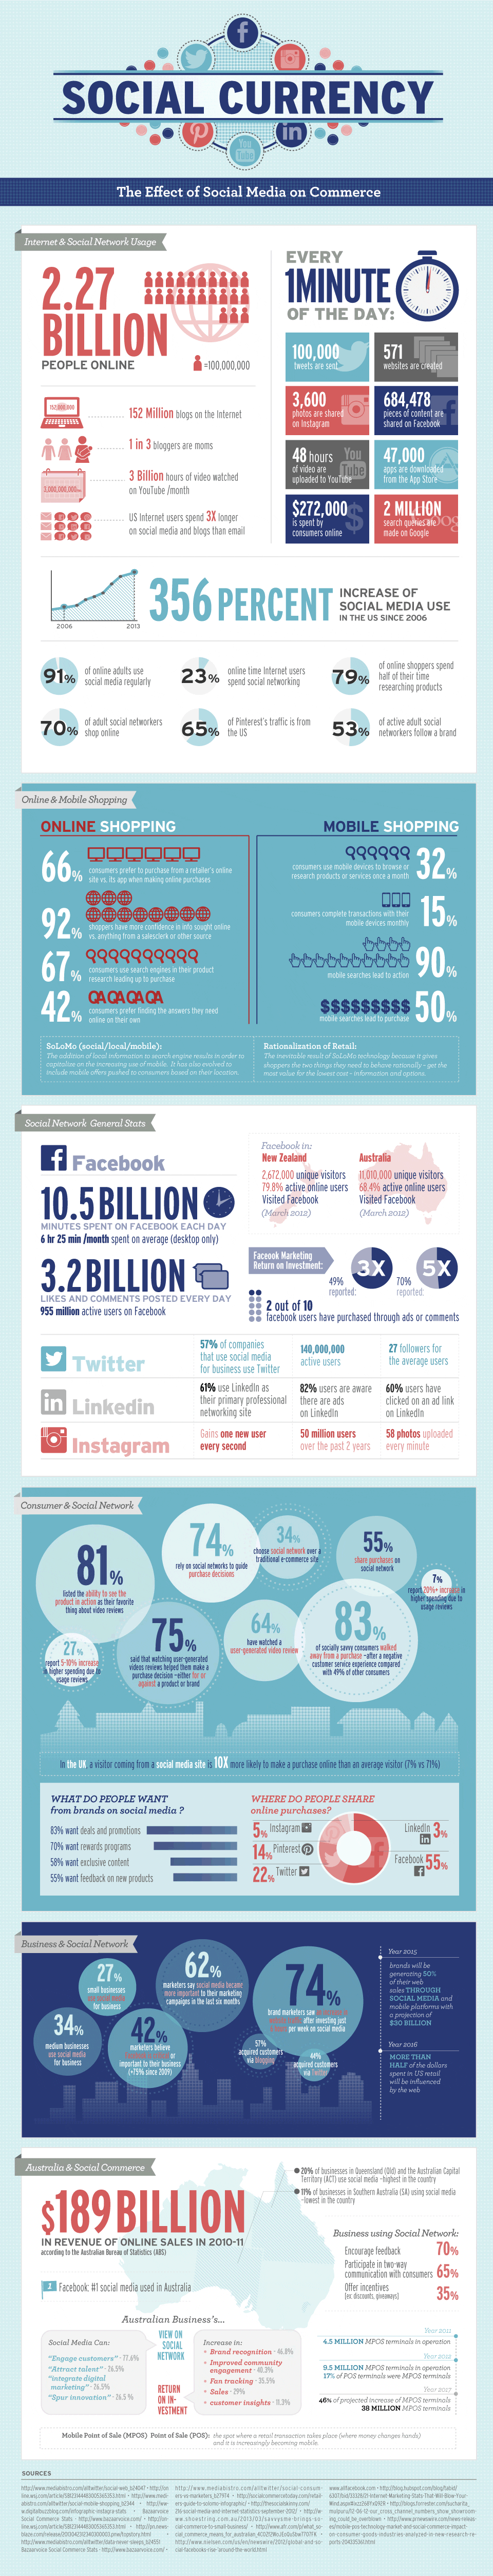 social commerce facts infographic